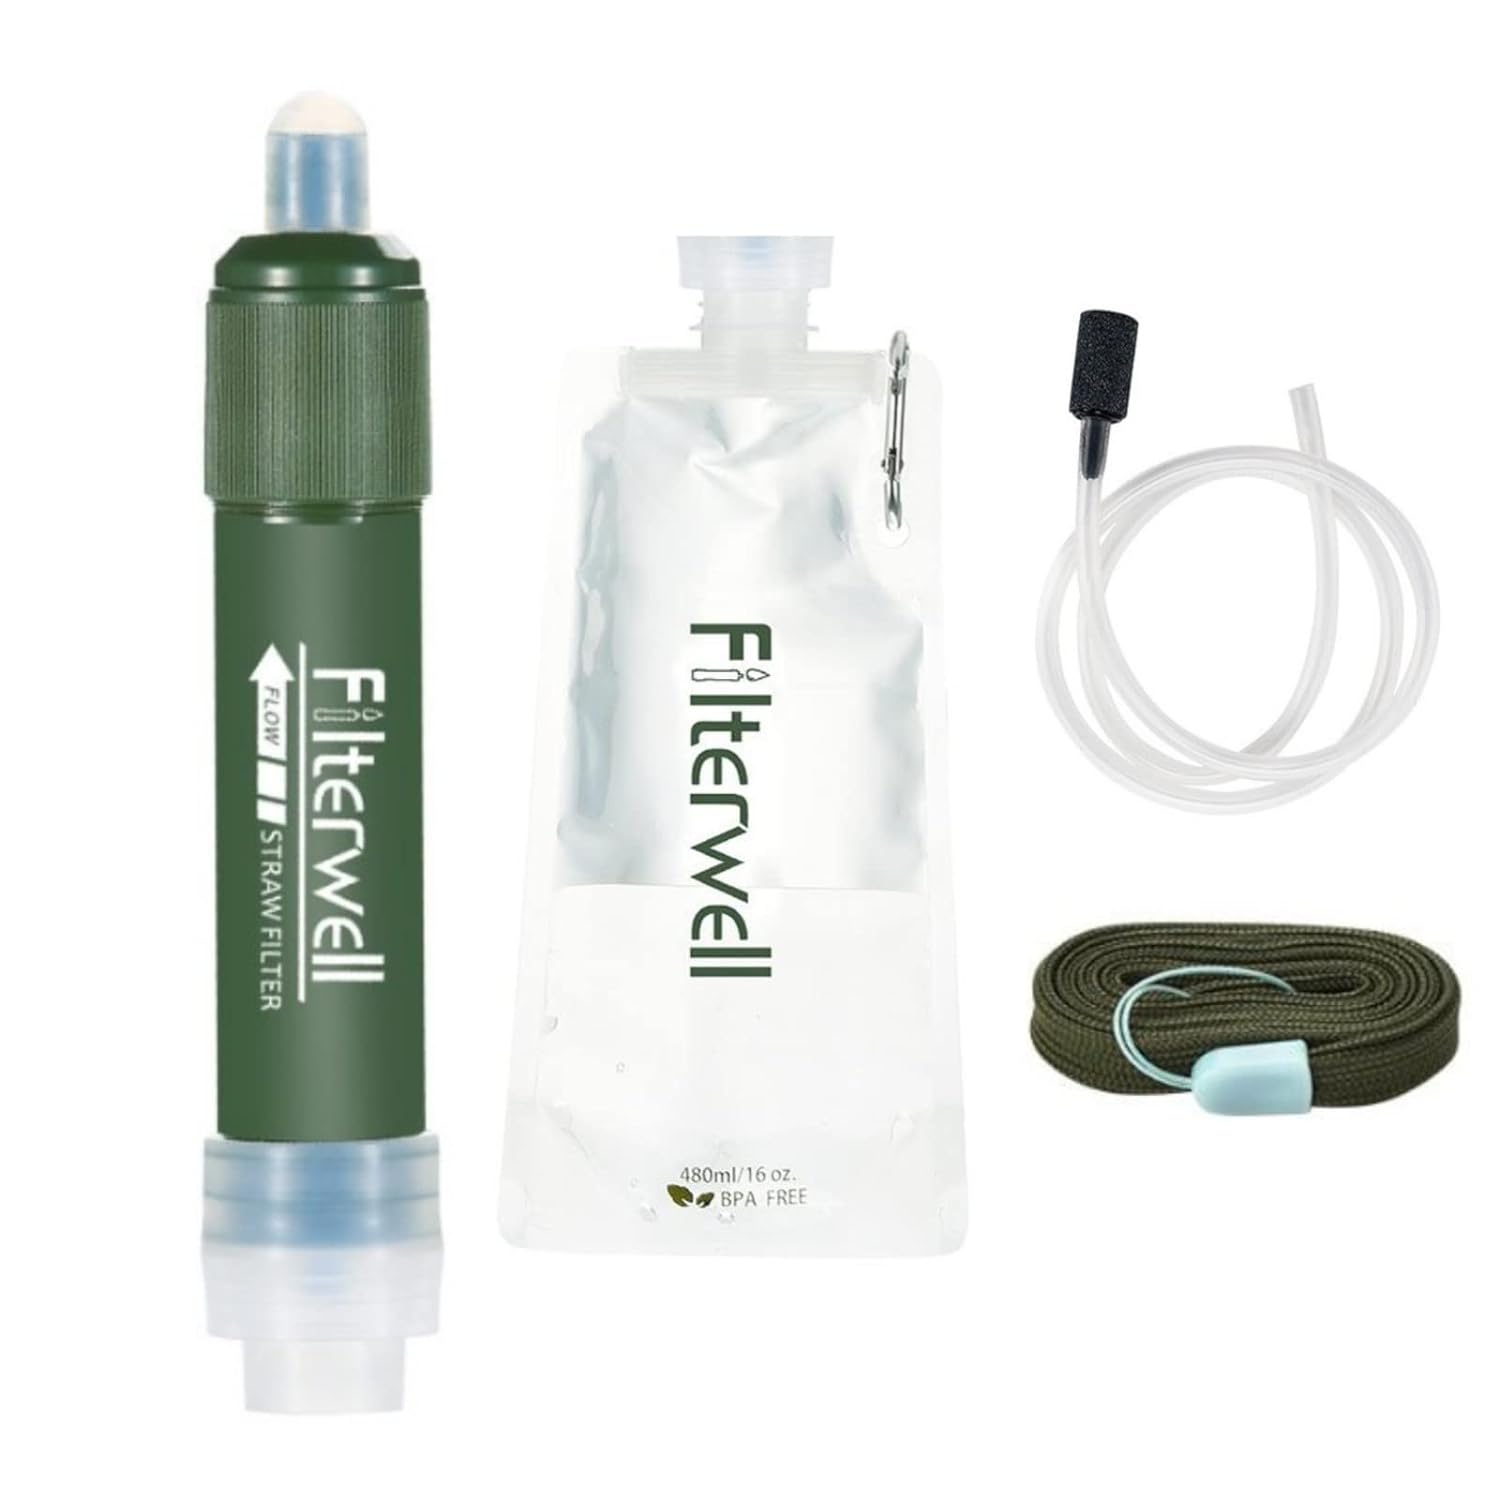 Personal Water Filter, 4000L Portable Water Filter Kit for Camping, 0.01 Micron Filter, Remove 99.9% Bacteria, Outdoor Survival Equipment